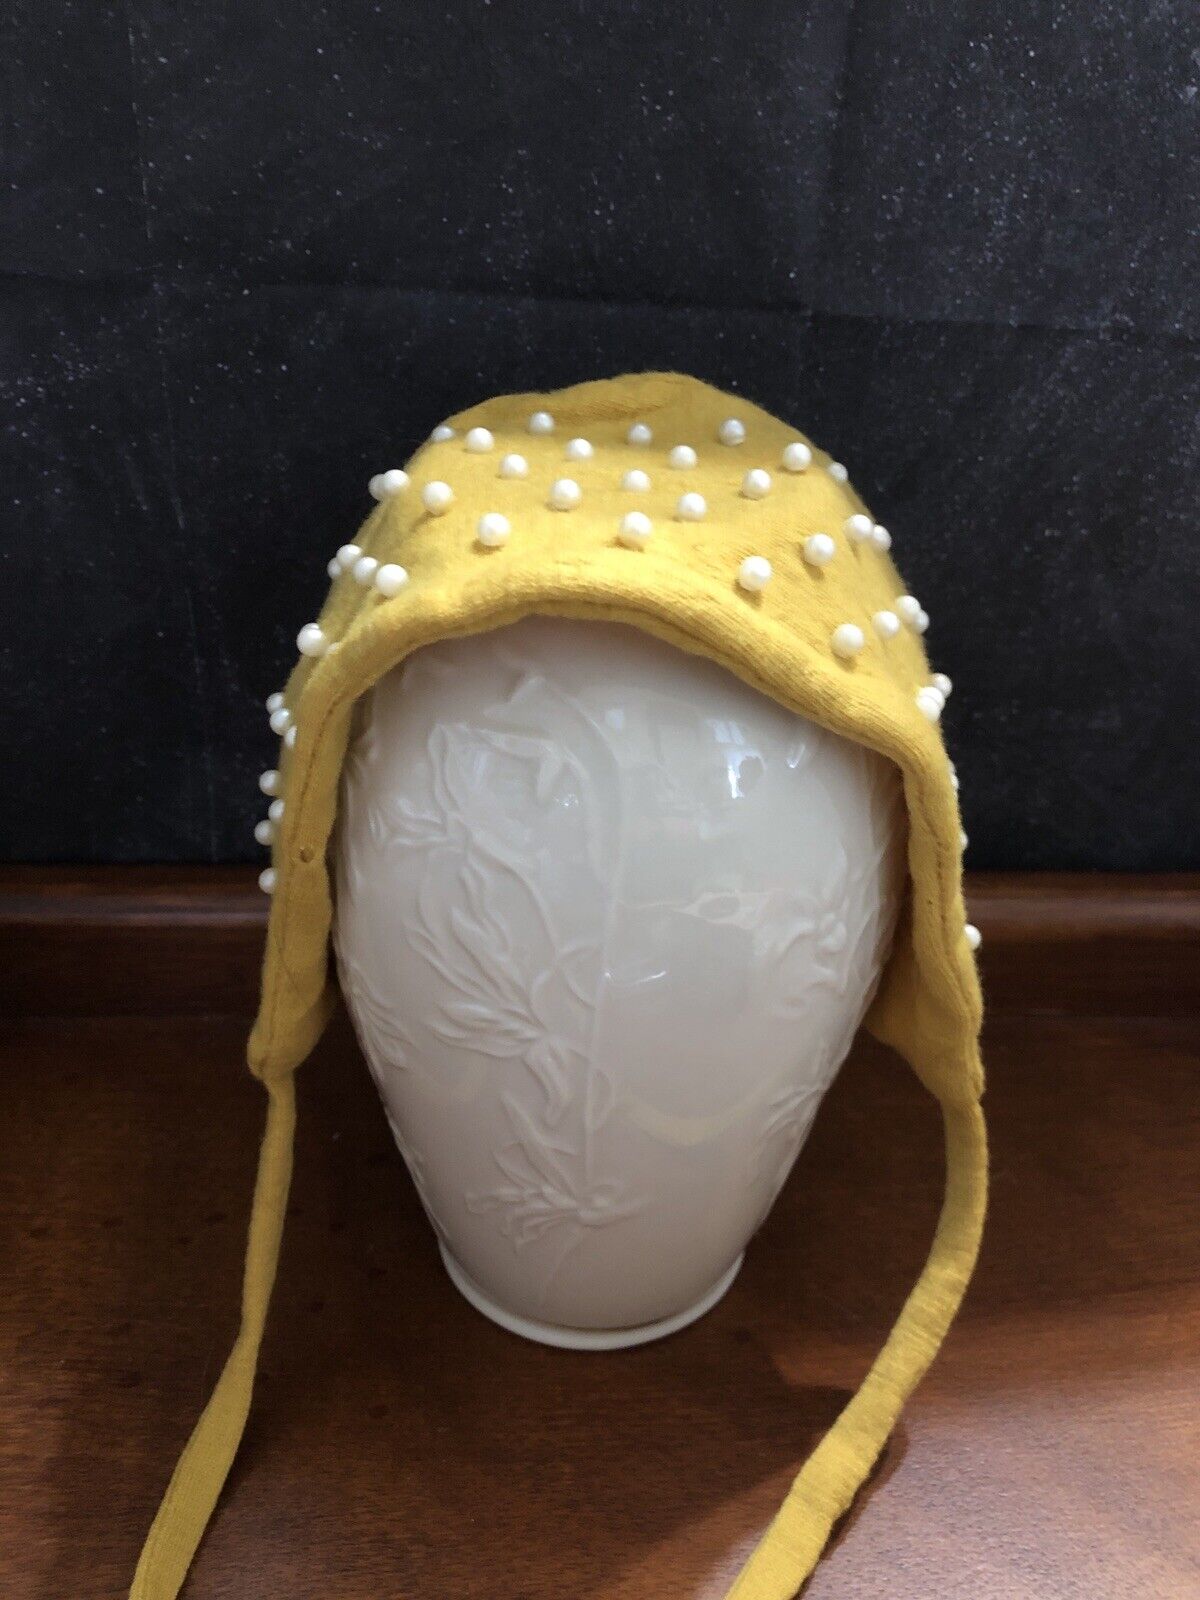 Vintage Golden Color Wool Handmade Baby Bonnet With Ties And Pearl Embellishment